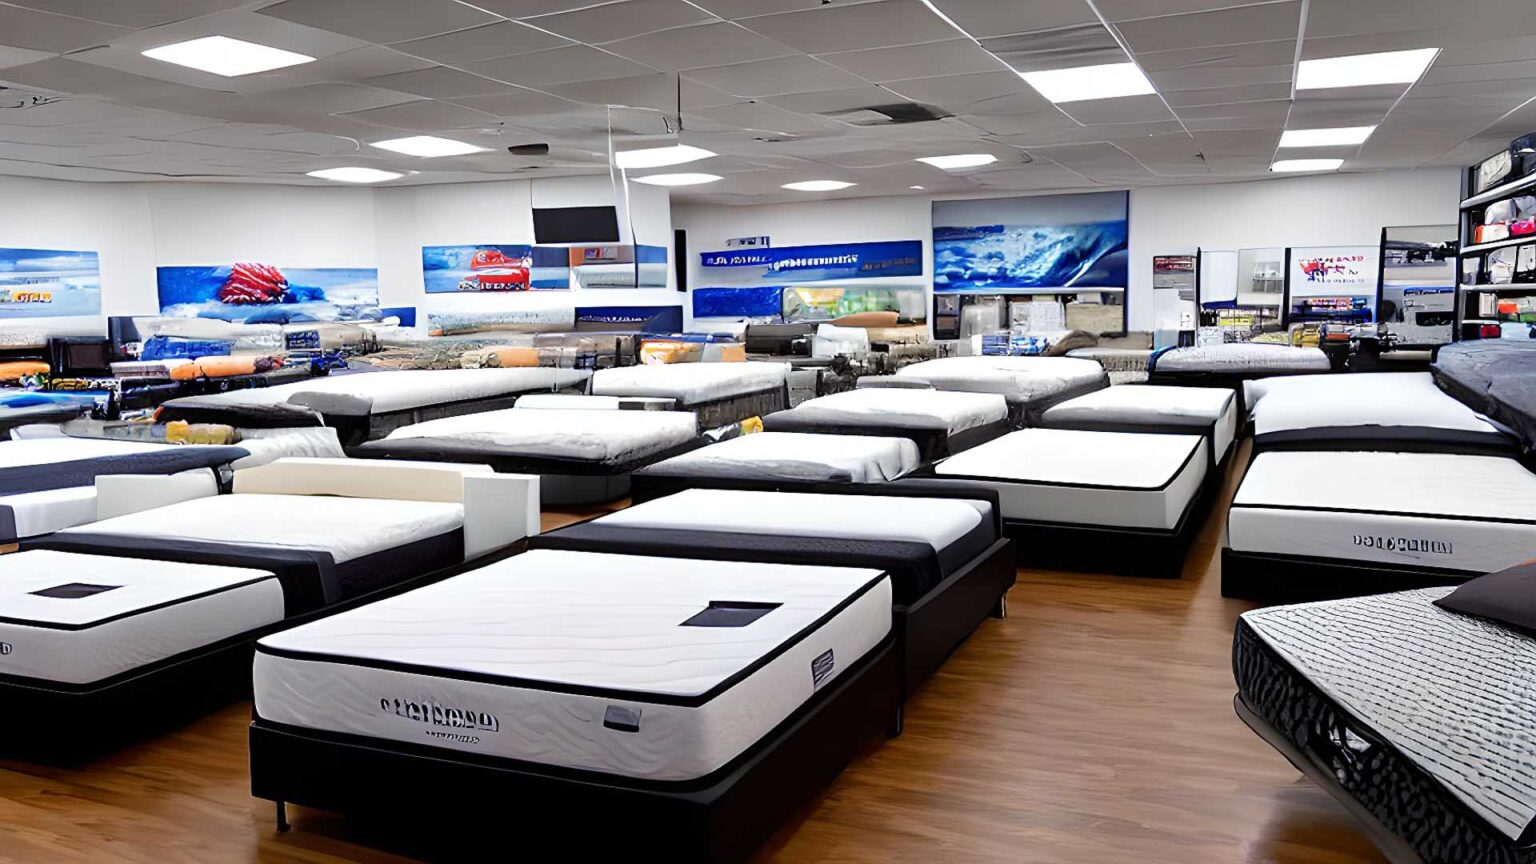 Mattress Stores, mattress dealers, and mattress retailers near me in Levittown, NY